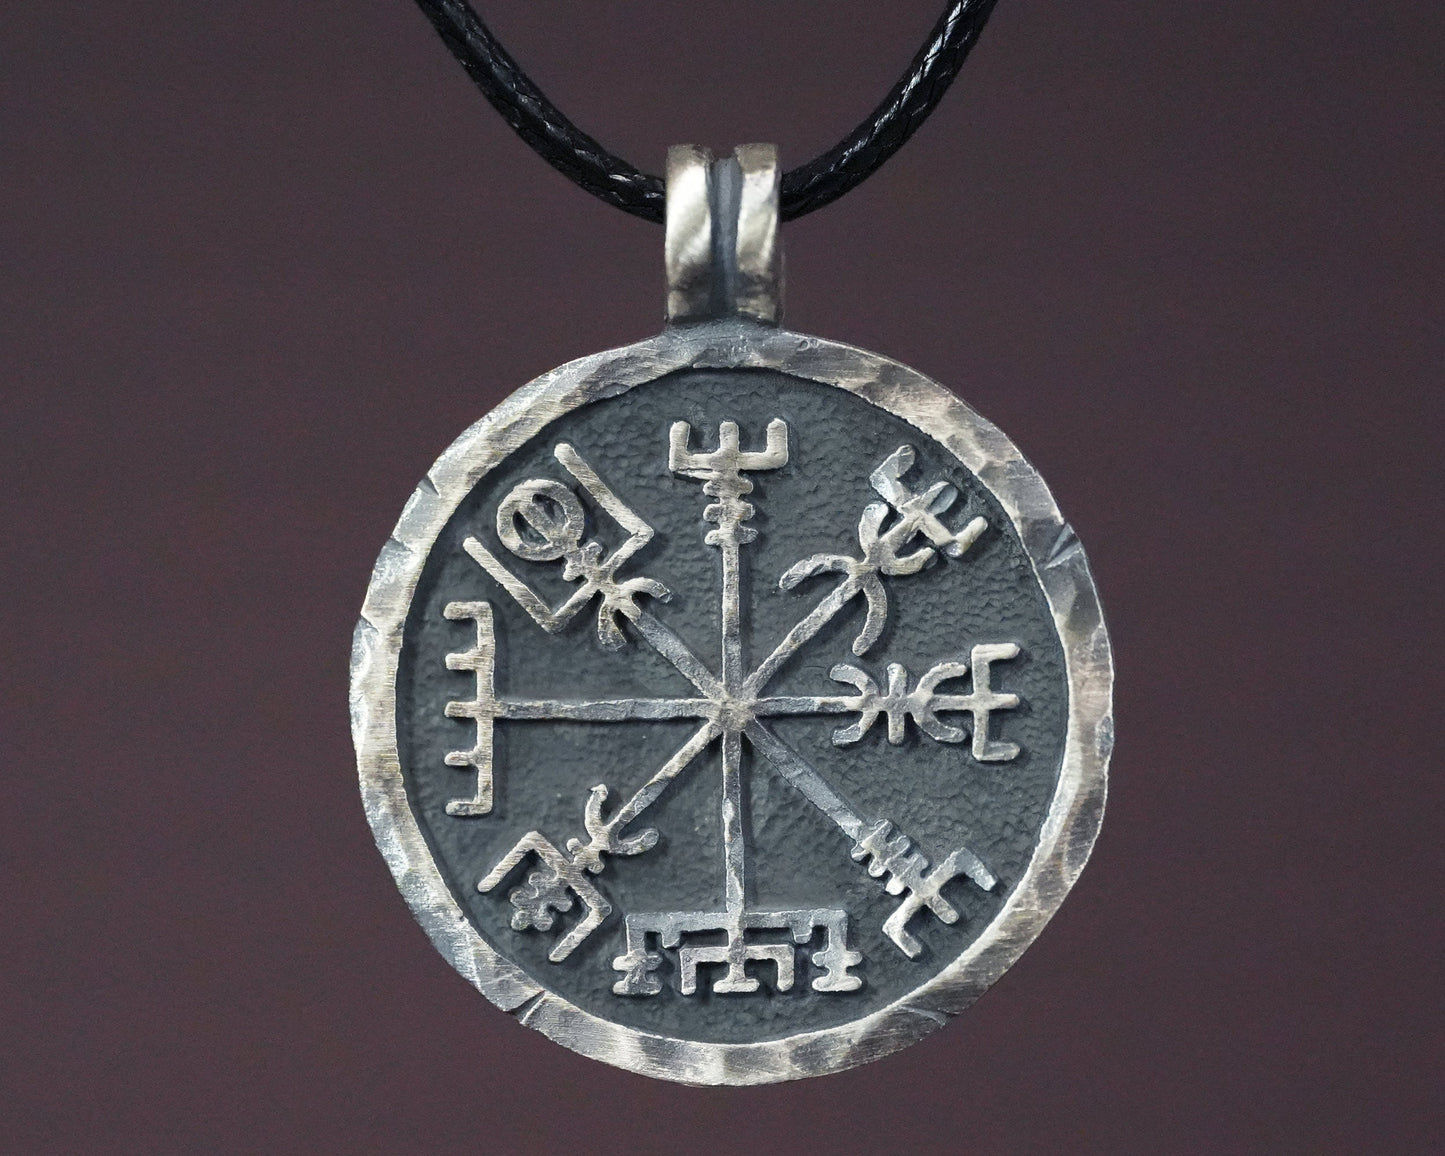 925 Sterling Silver Compass Necklace For Men With Adjustable String Handmade By Gudbrand - Baldur Jewelry